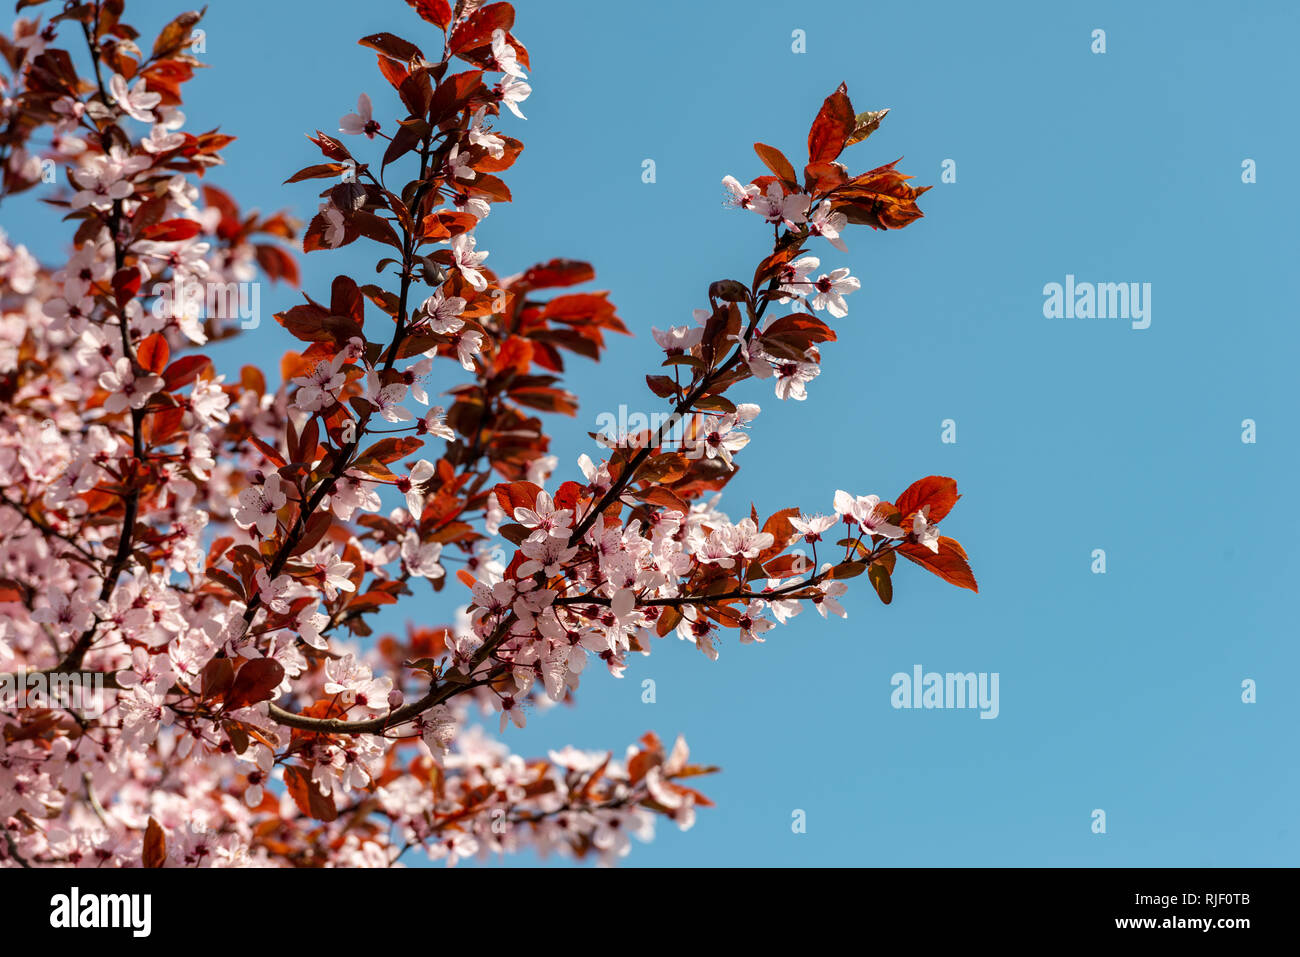 flowering plant with white blossoms and orange brown leafs against blue sky Stock Photo